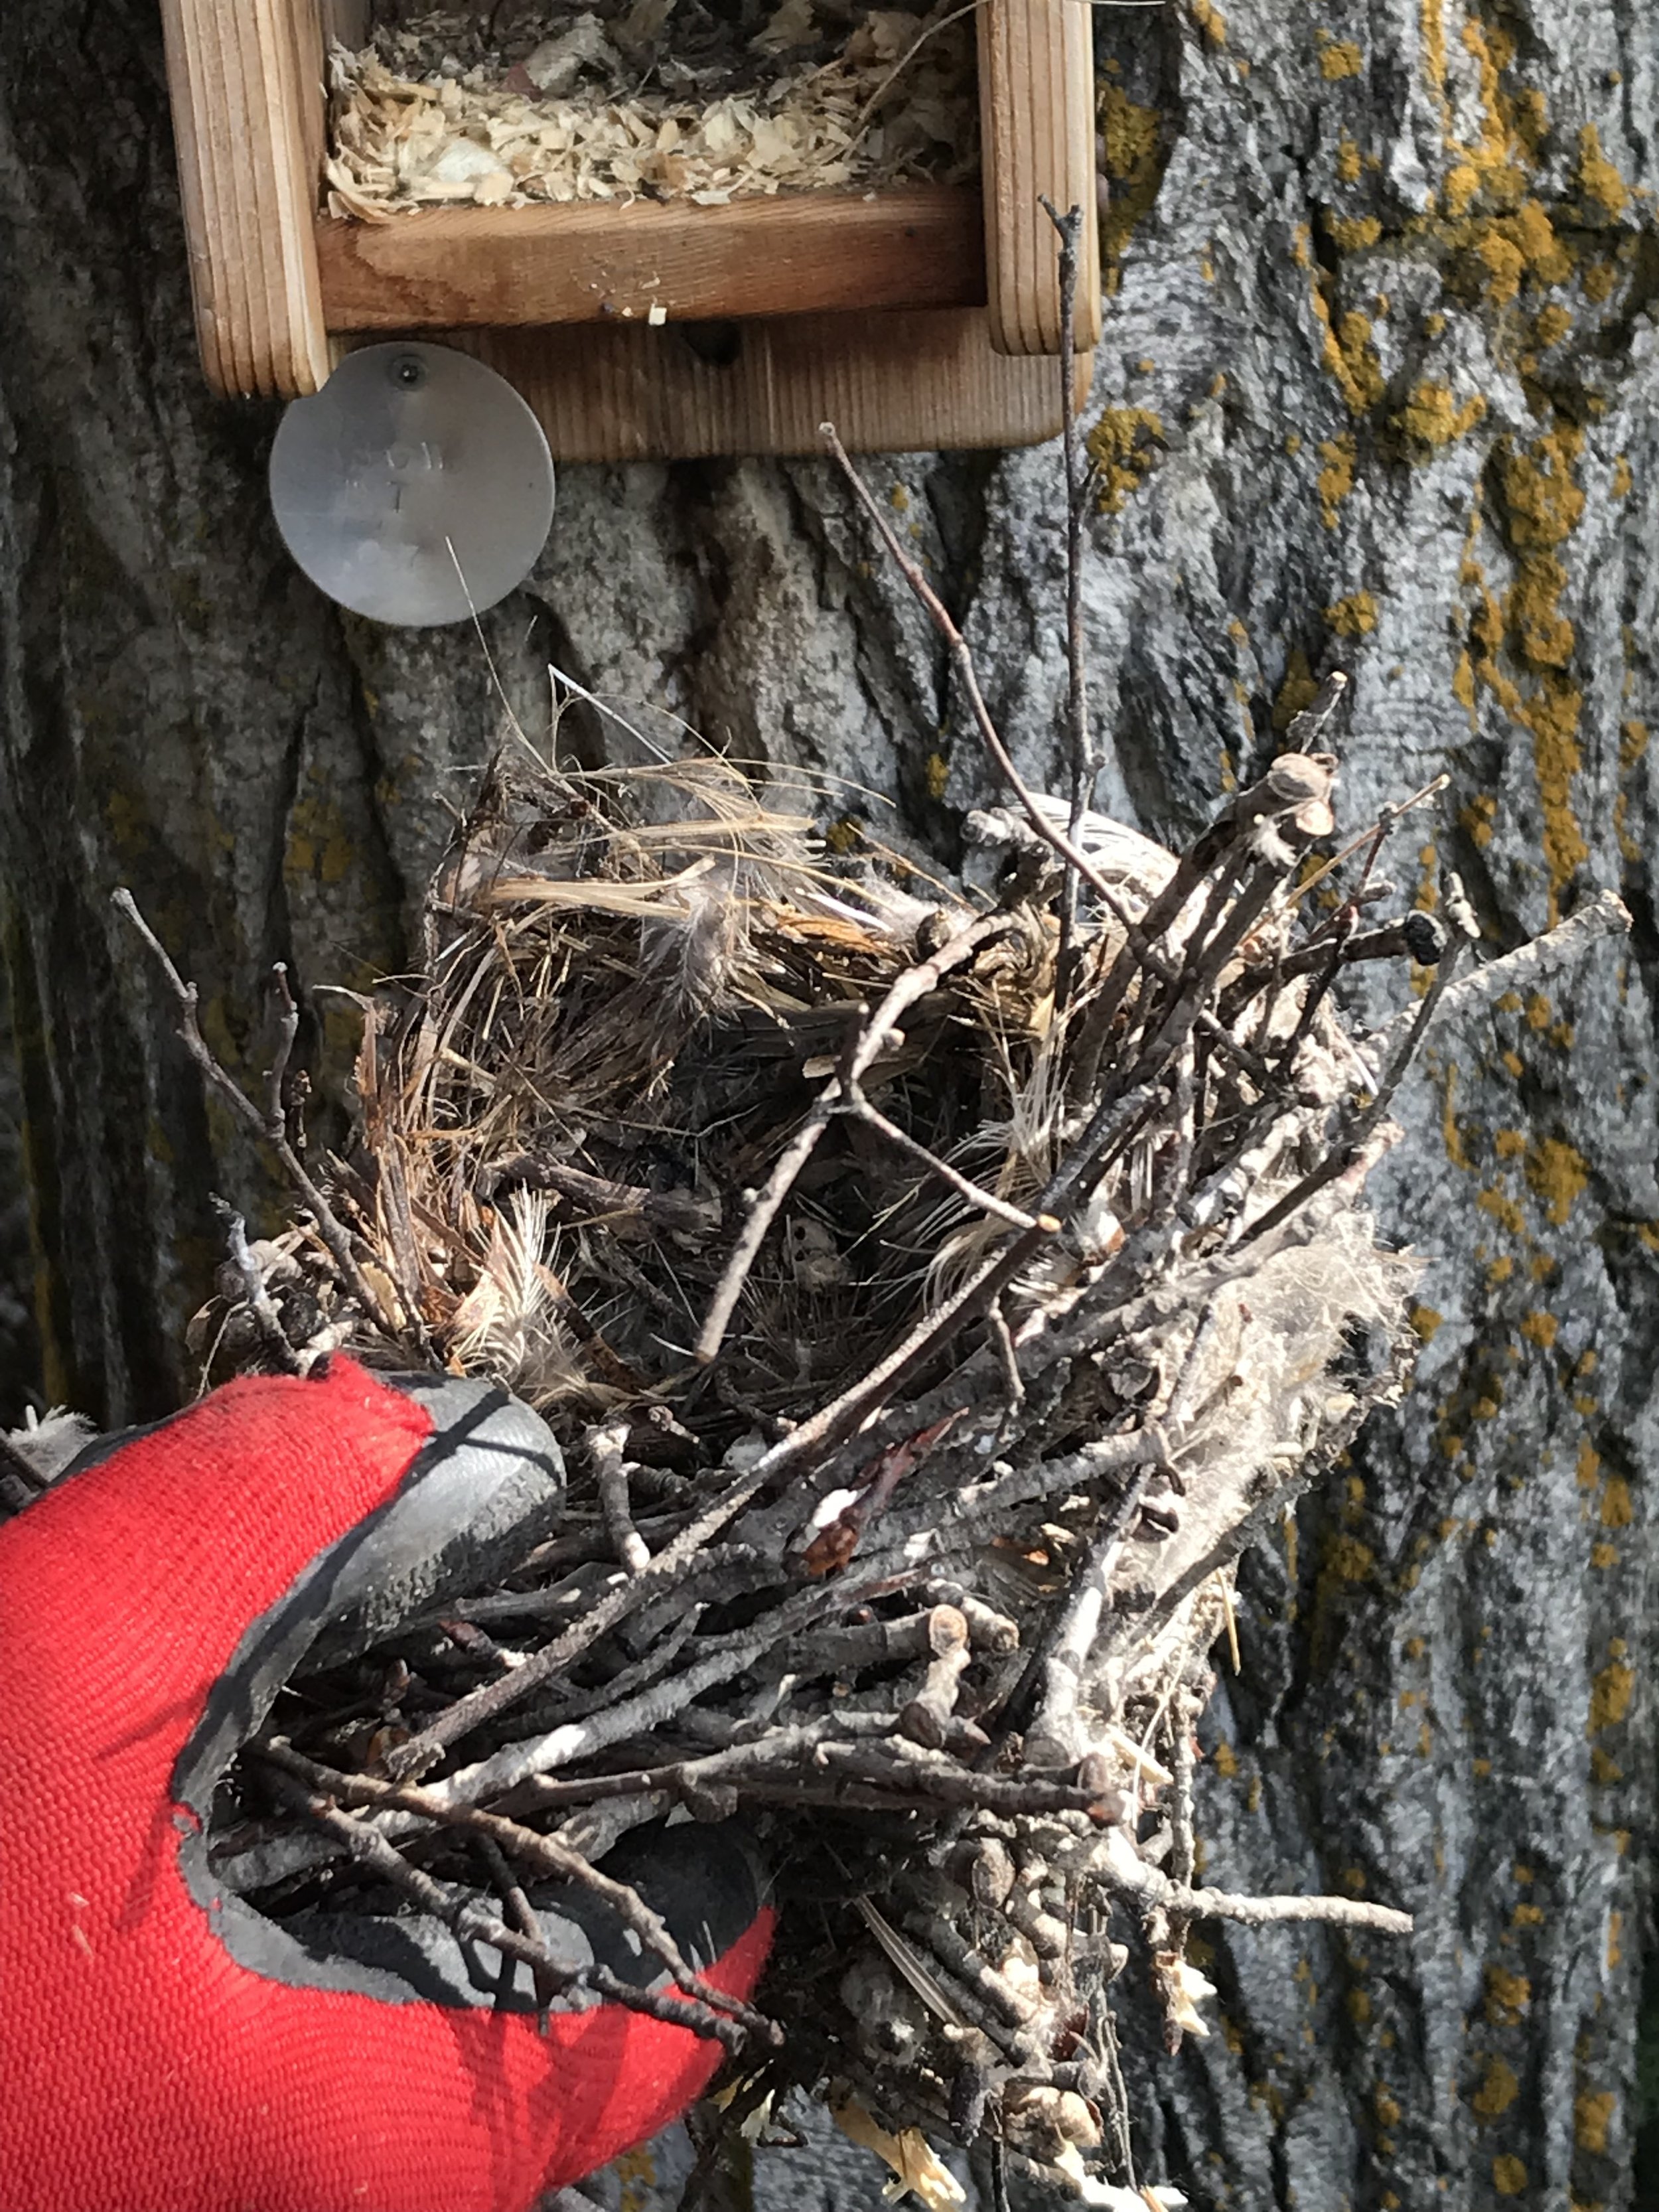 Volunteers cleaned out 34 nest boxes at Boisvert's Greenwoods